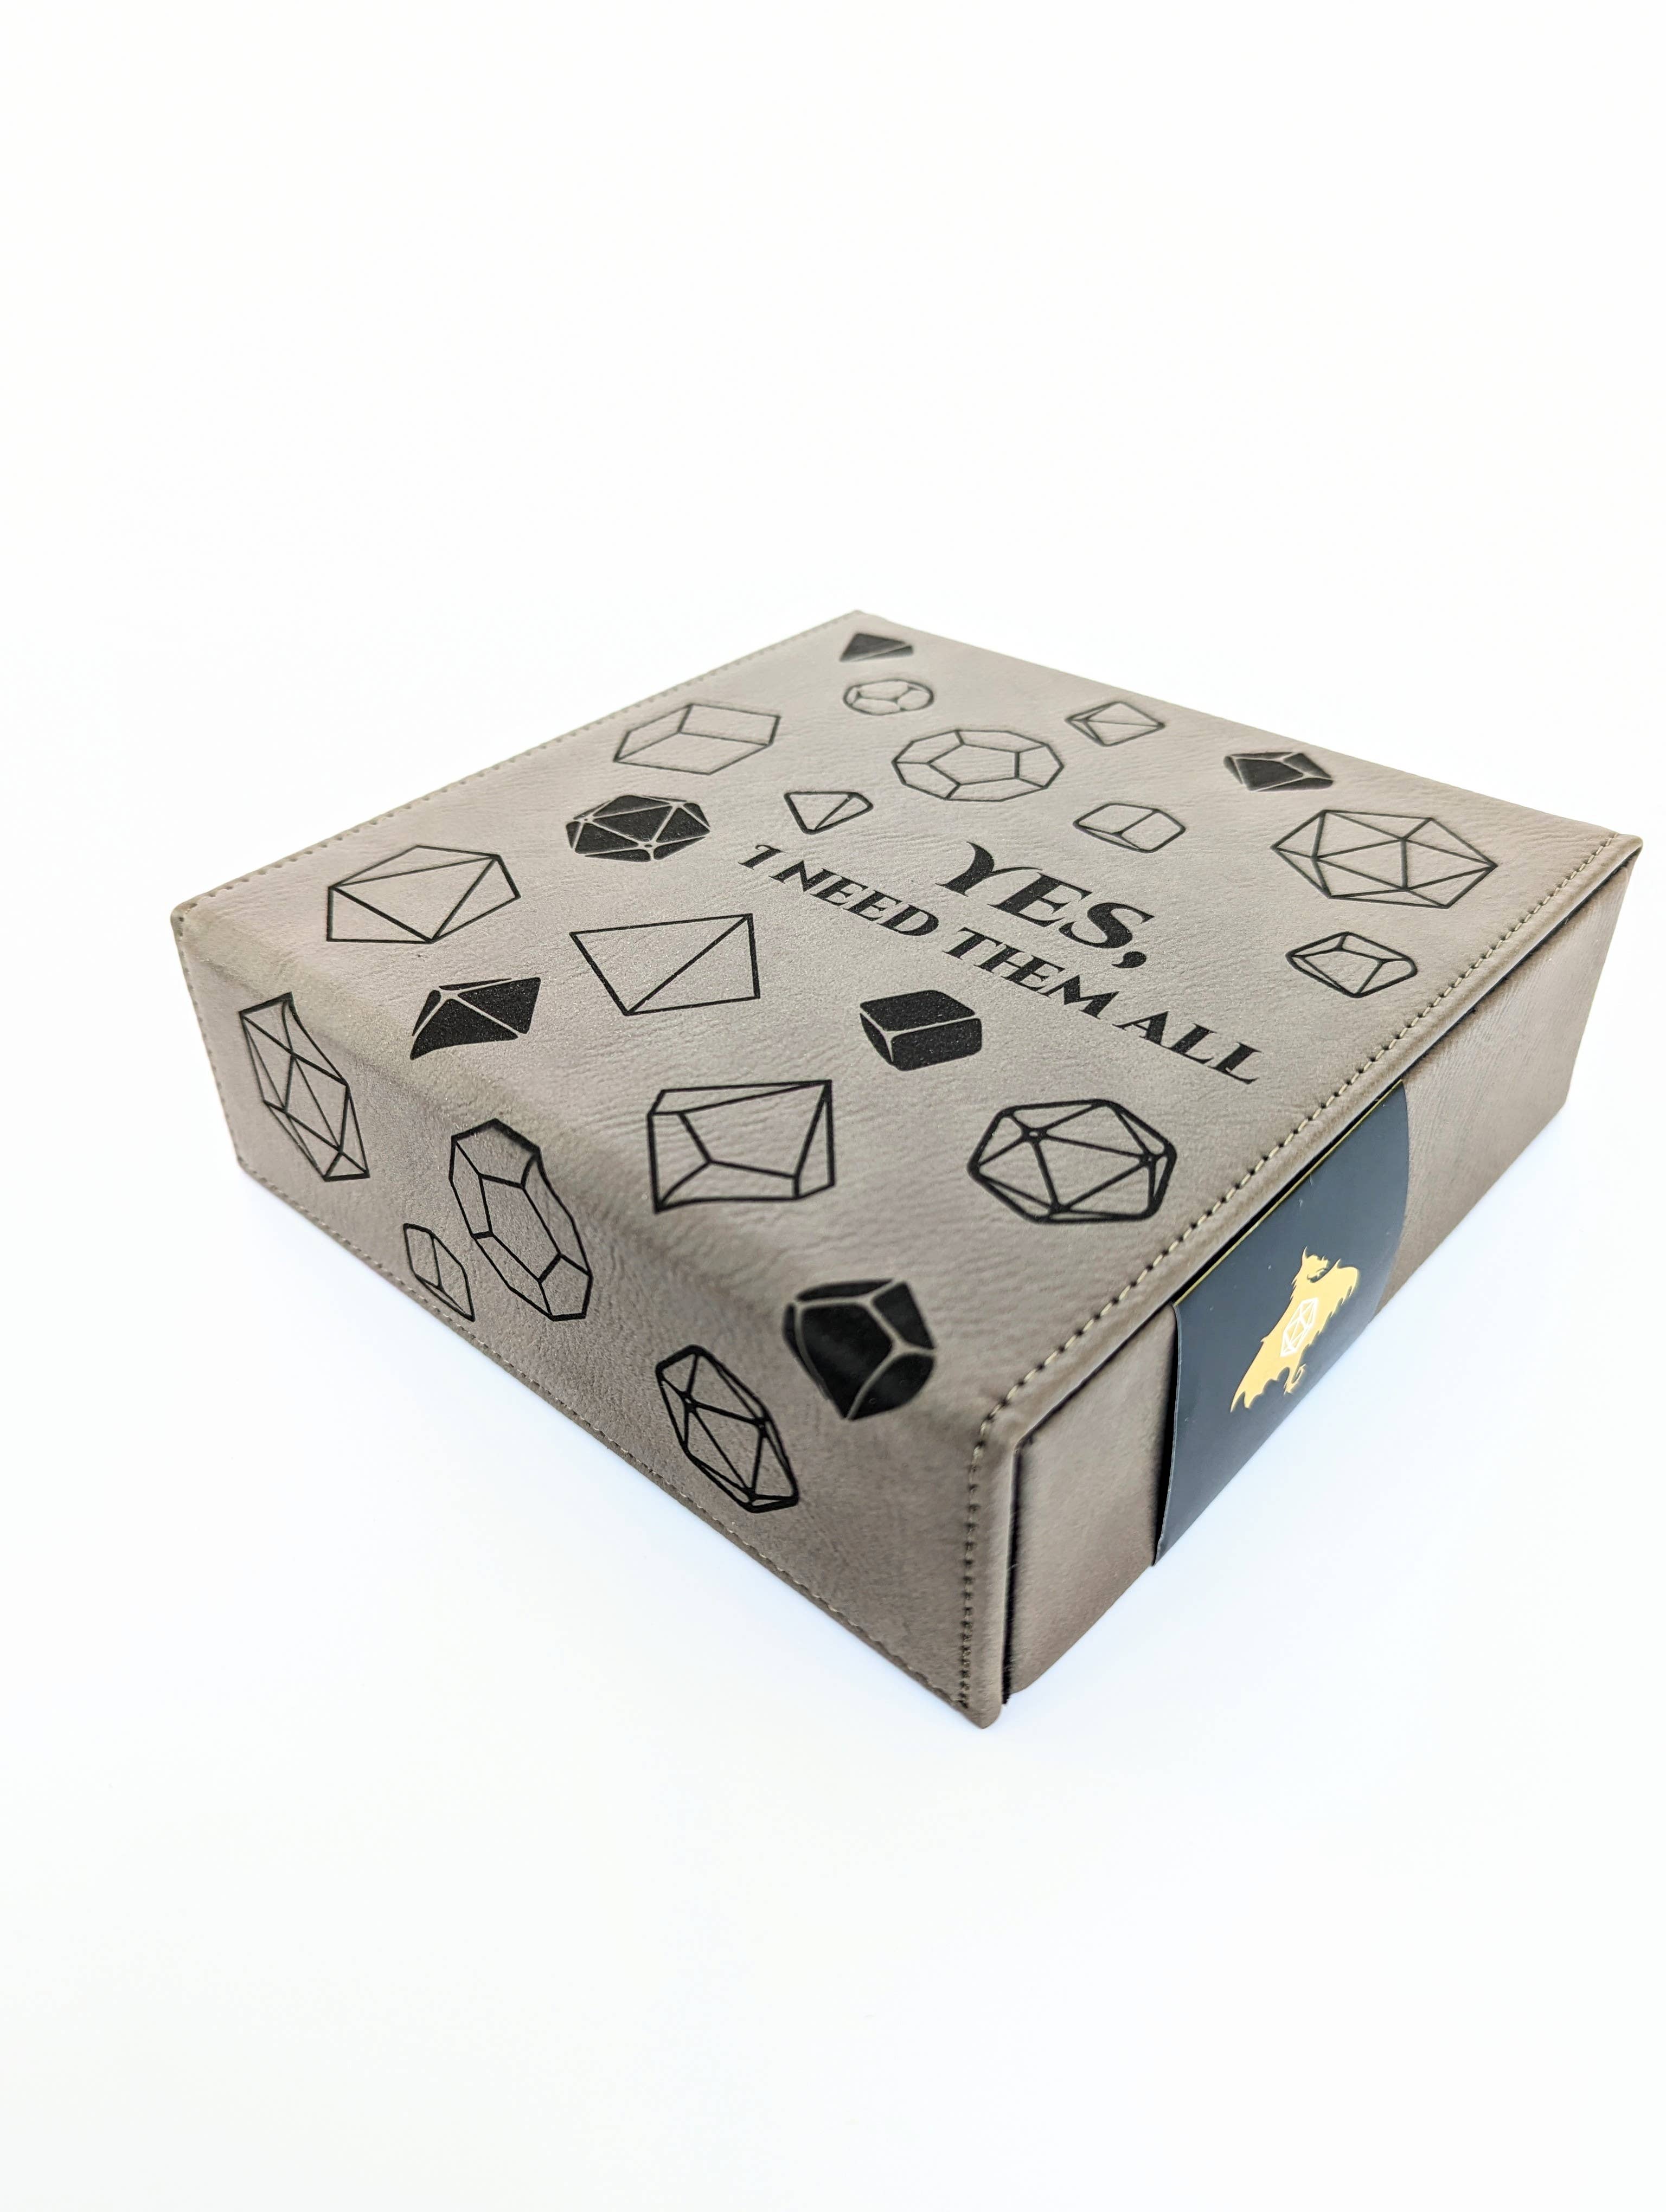 Yes, I Need Them All - D&D - Vegan Leather Dice Box - Bards & Cards